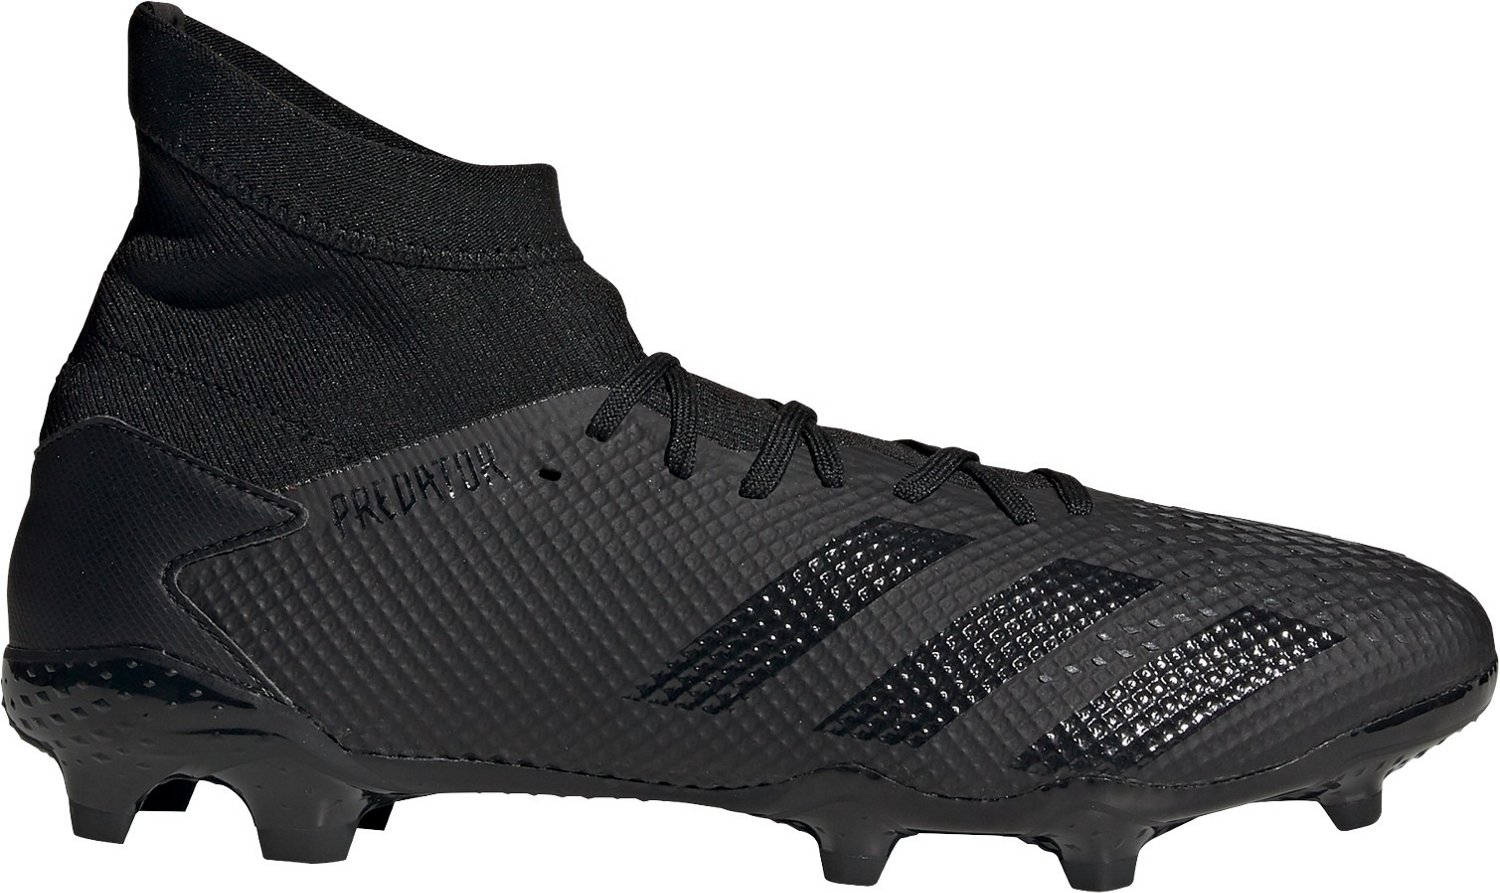 academy sport soccer shoes